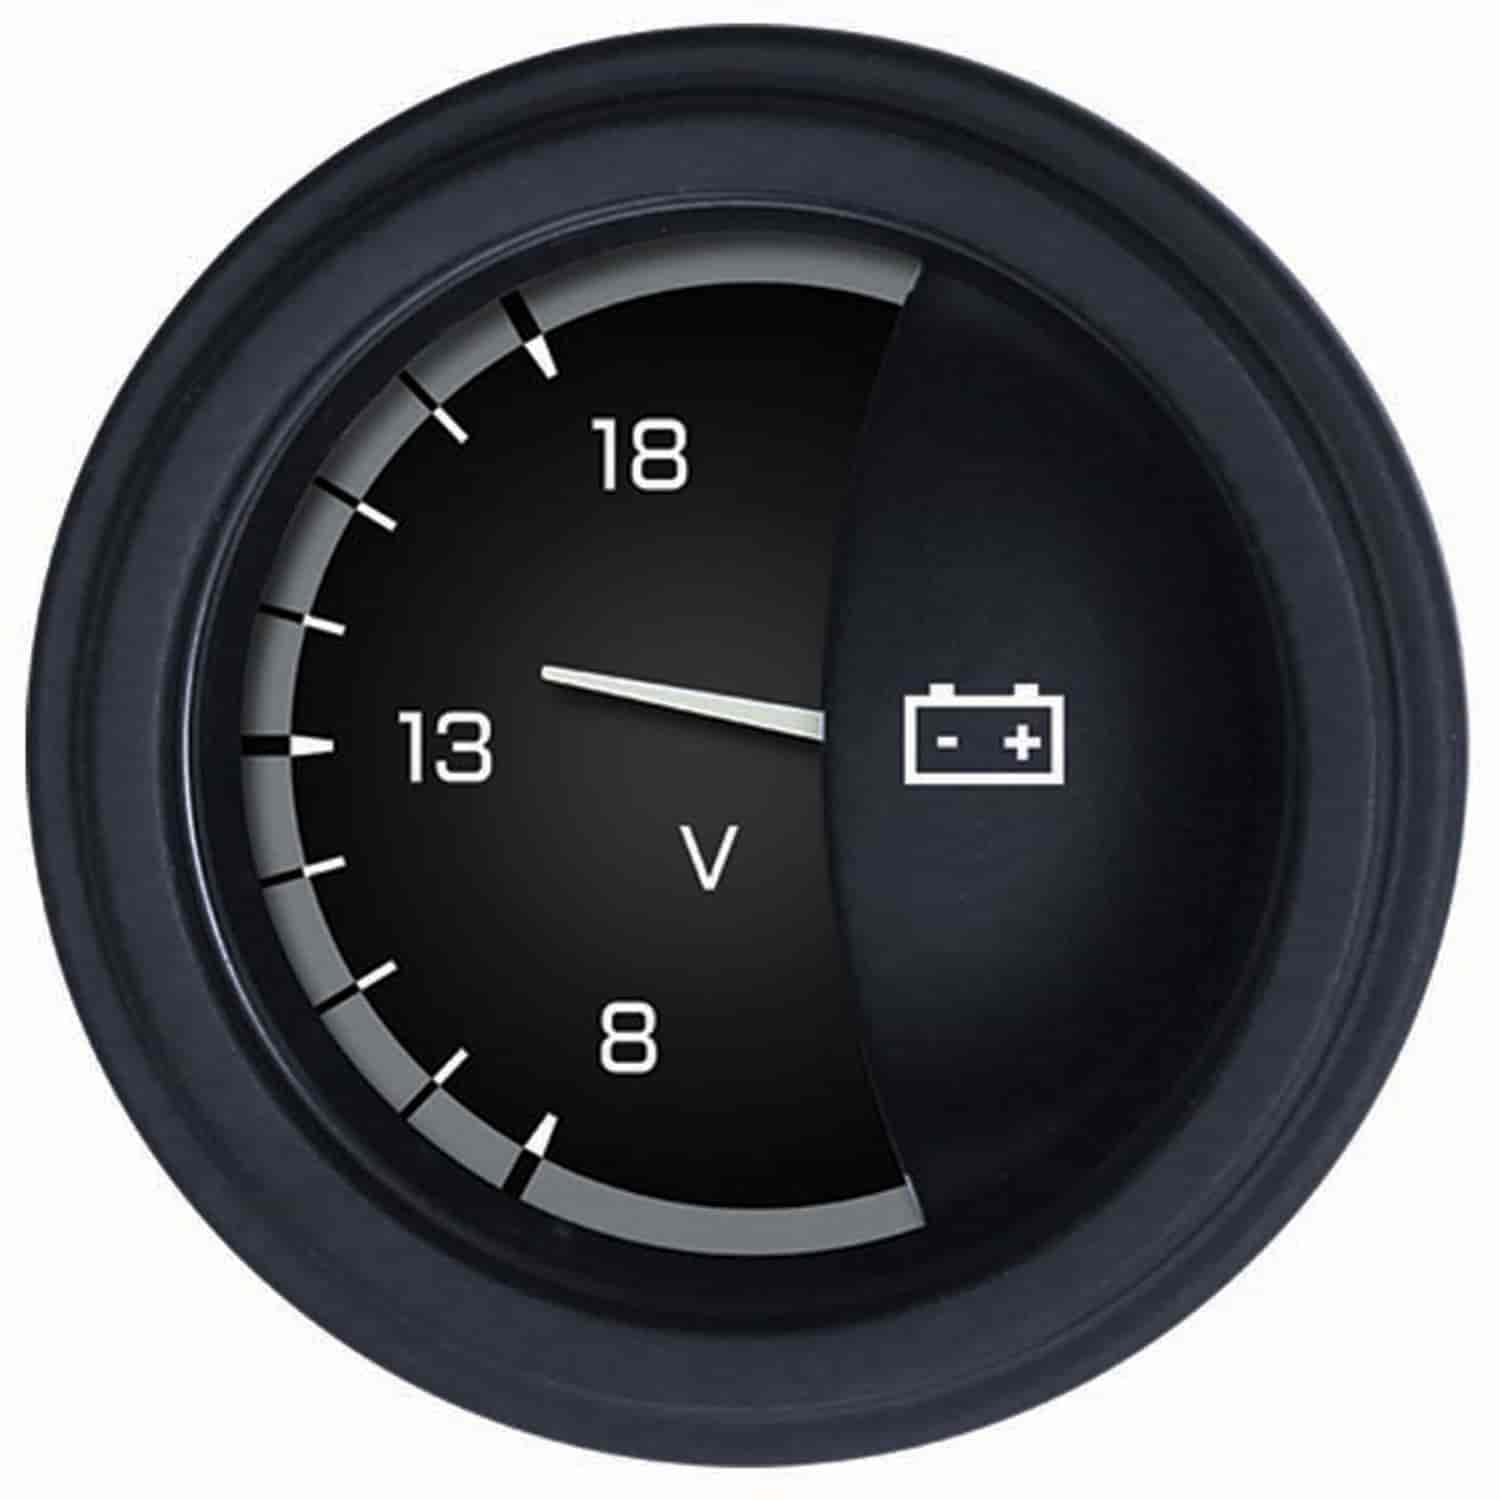 Gray AutoCross Series Voltmeter 2-1/8" Electrical